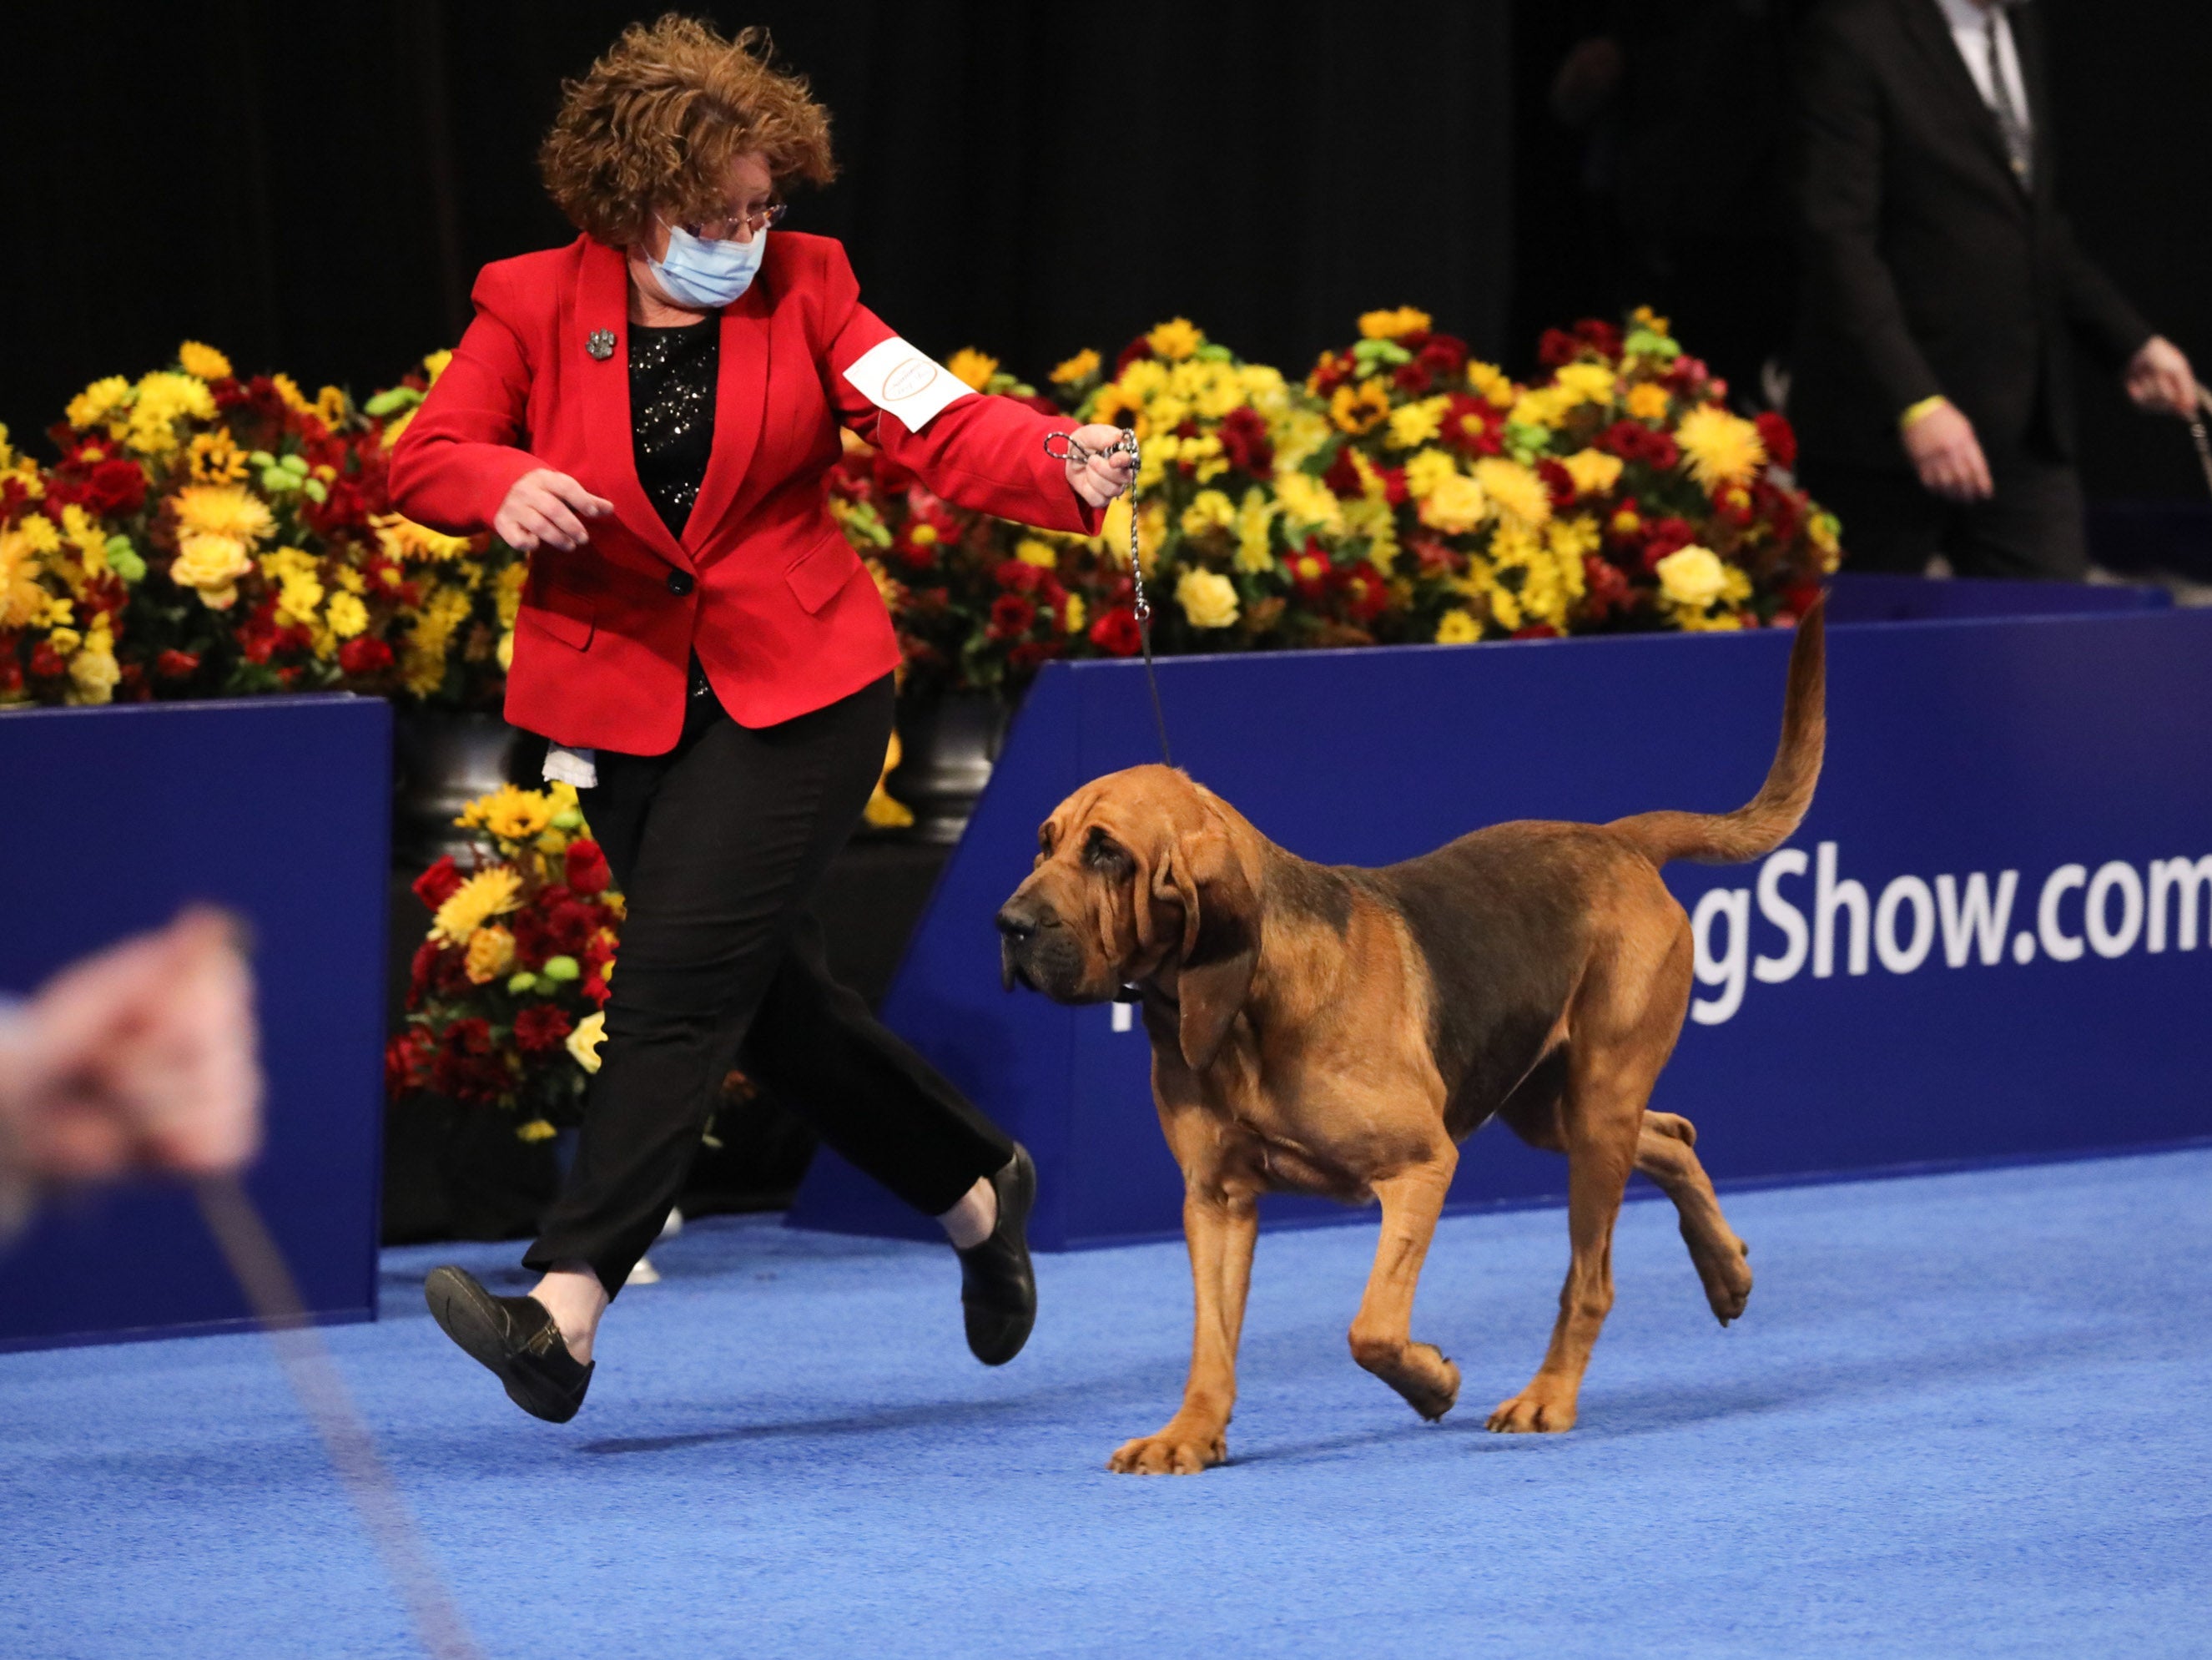 A bloodhound competes in the 2020 National Dog show